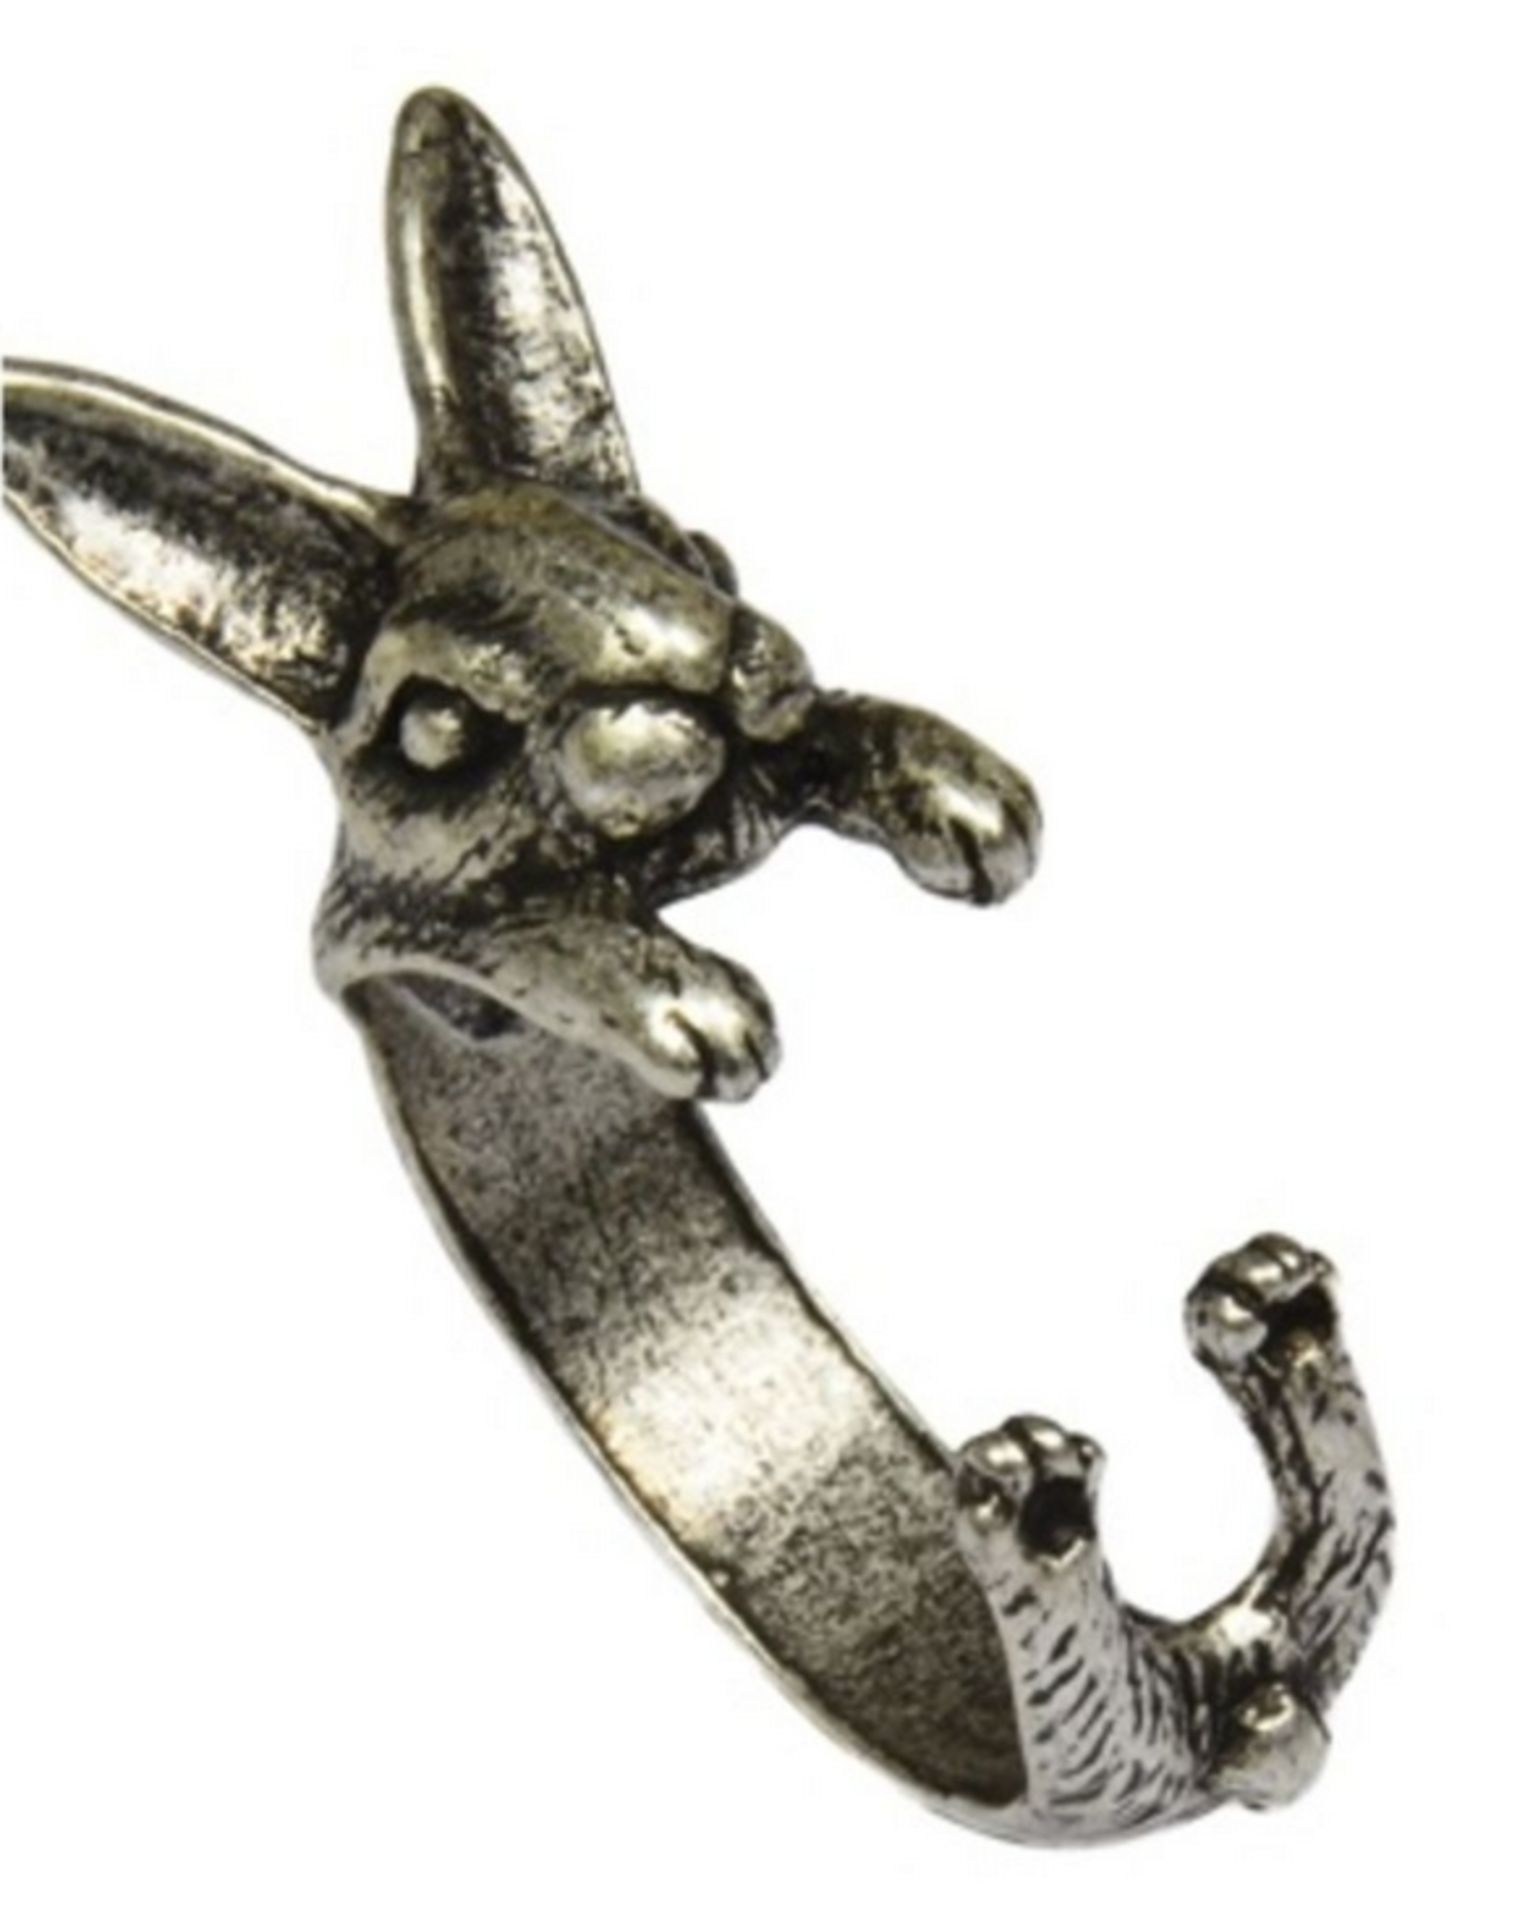 50 Unusual Animal Rings, Can Be Adjusted Easily To Fit Most Fingers - Image 6 of 6